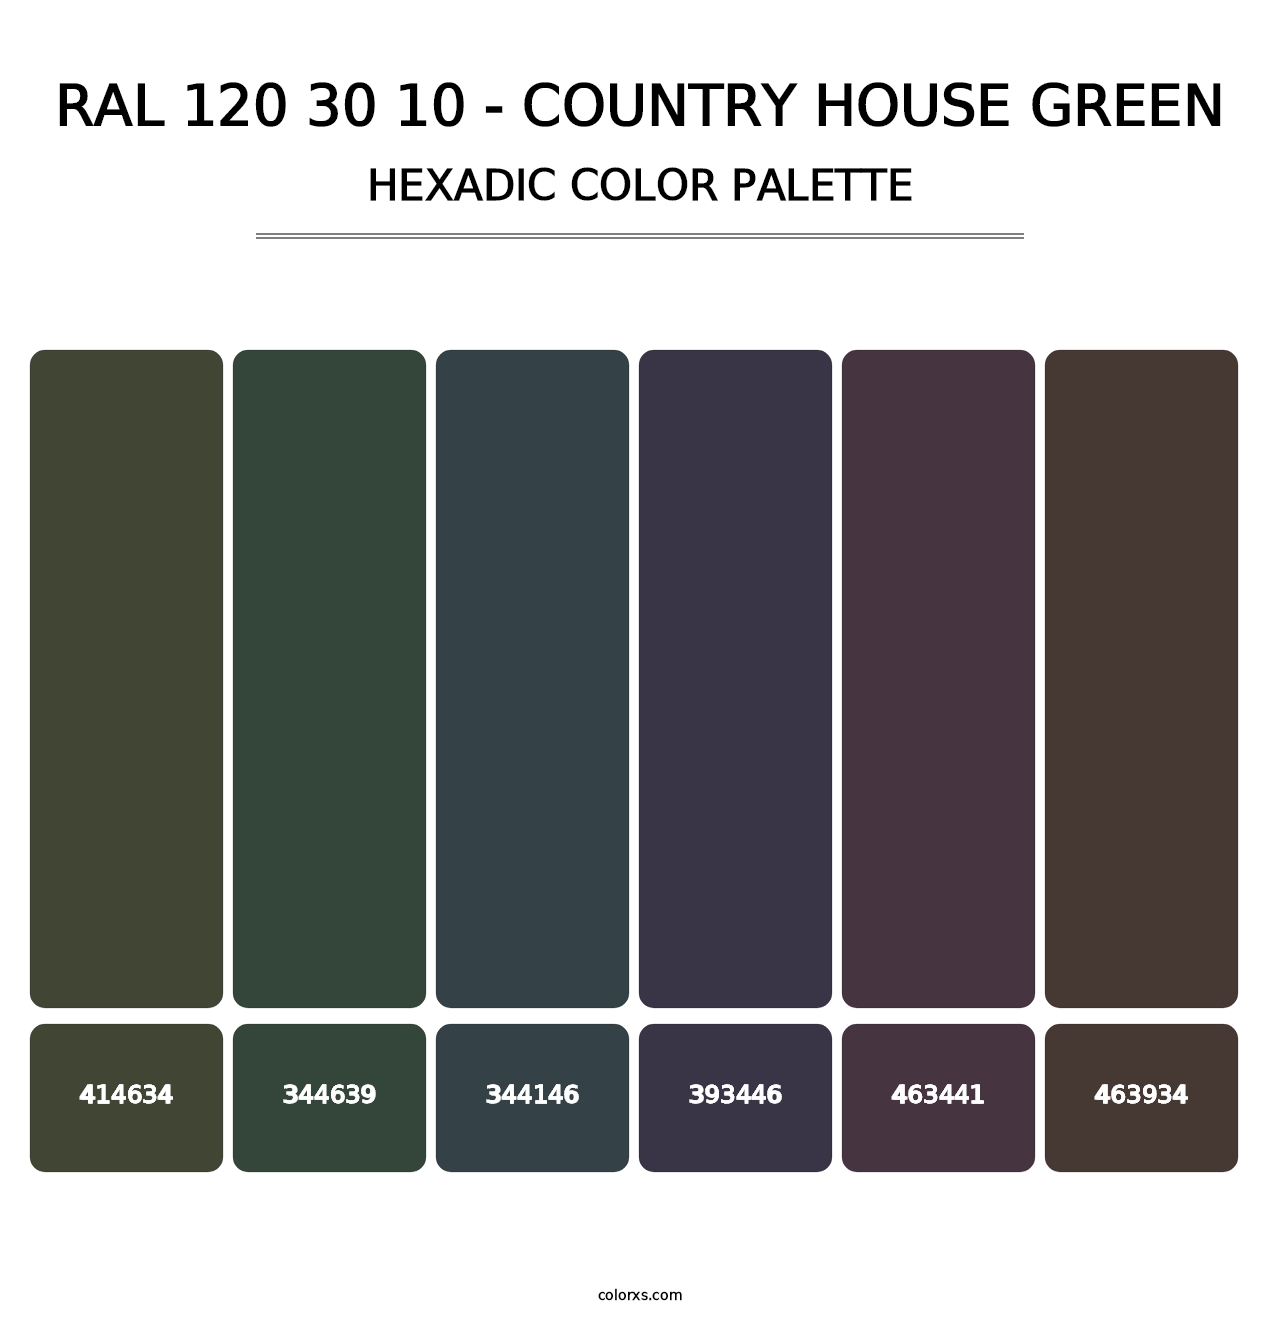 RAL 120 30 10 - Country House Green - Hexadic Color Palette